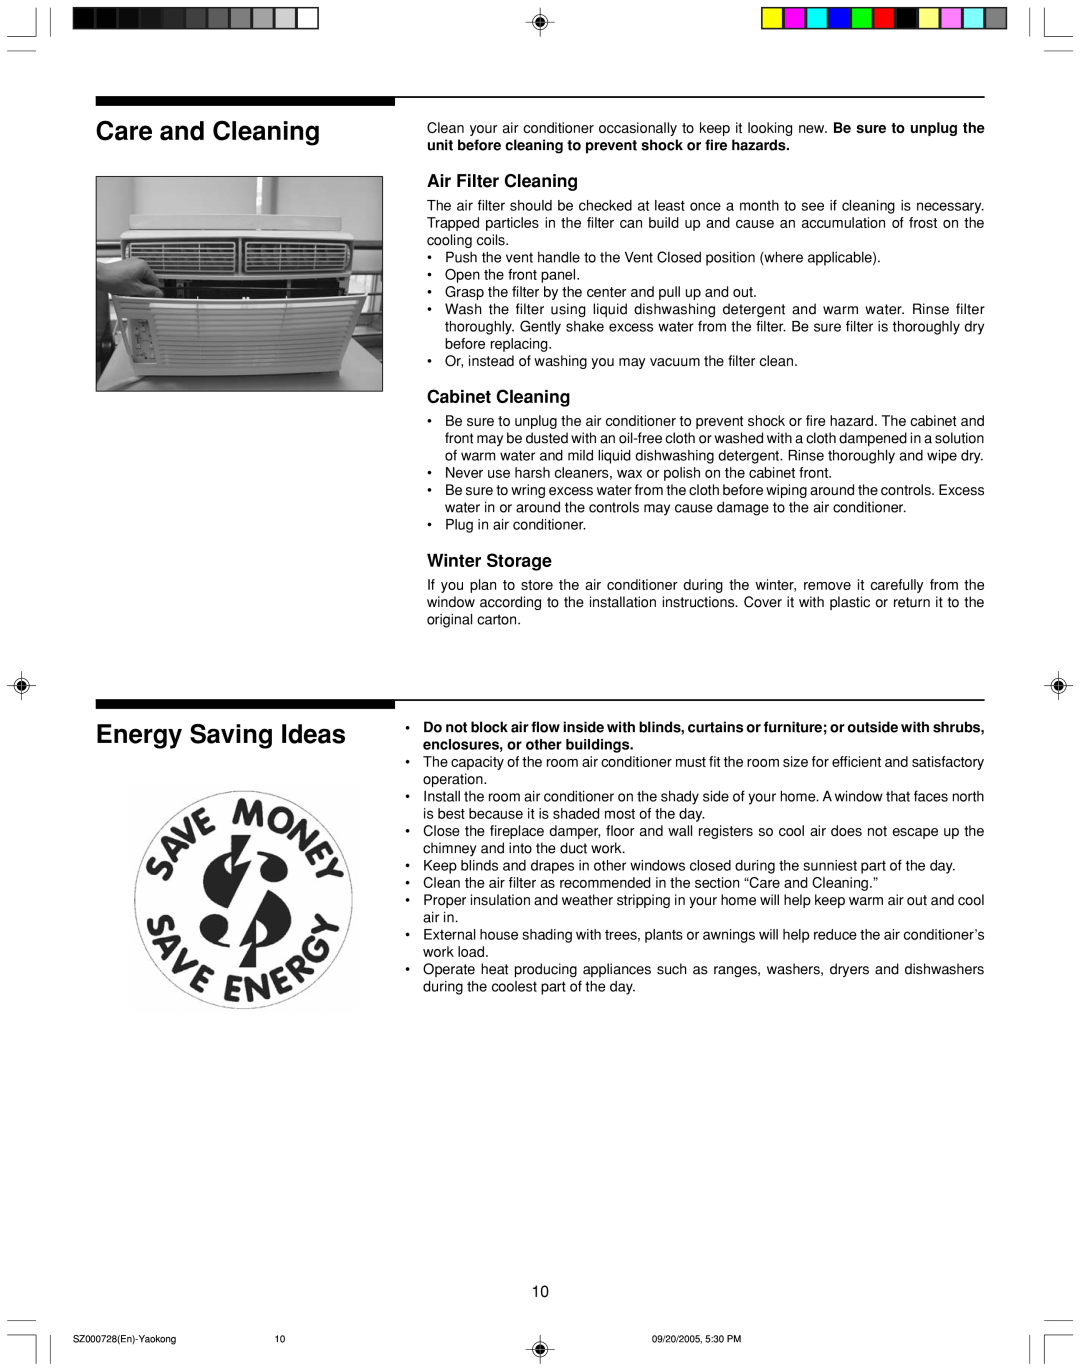 Frigidaire ELECTRONIC CONTROL AIR CONDITIONER Care and Cleaning Energy Saving Ideas, Air Filter Cleaning, Cabinet Cleaning 